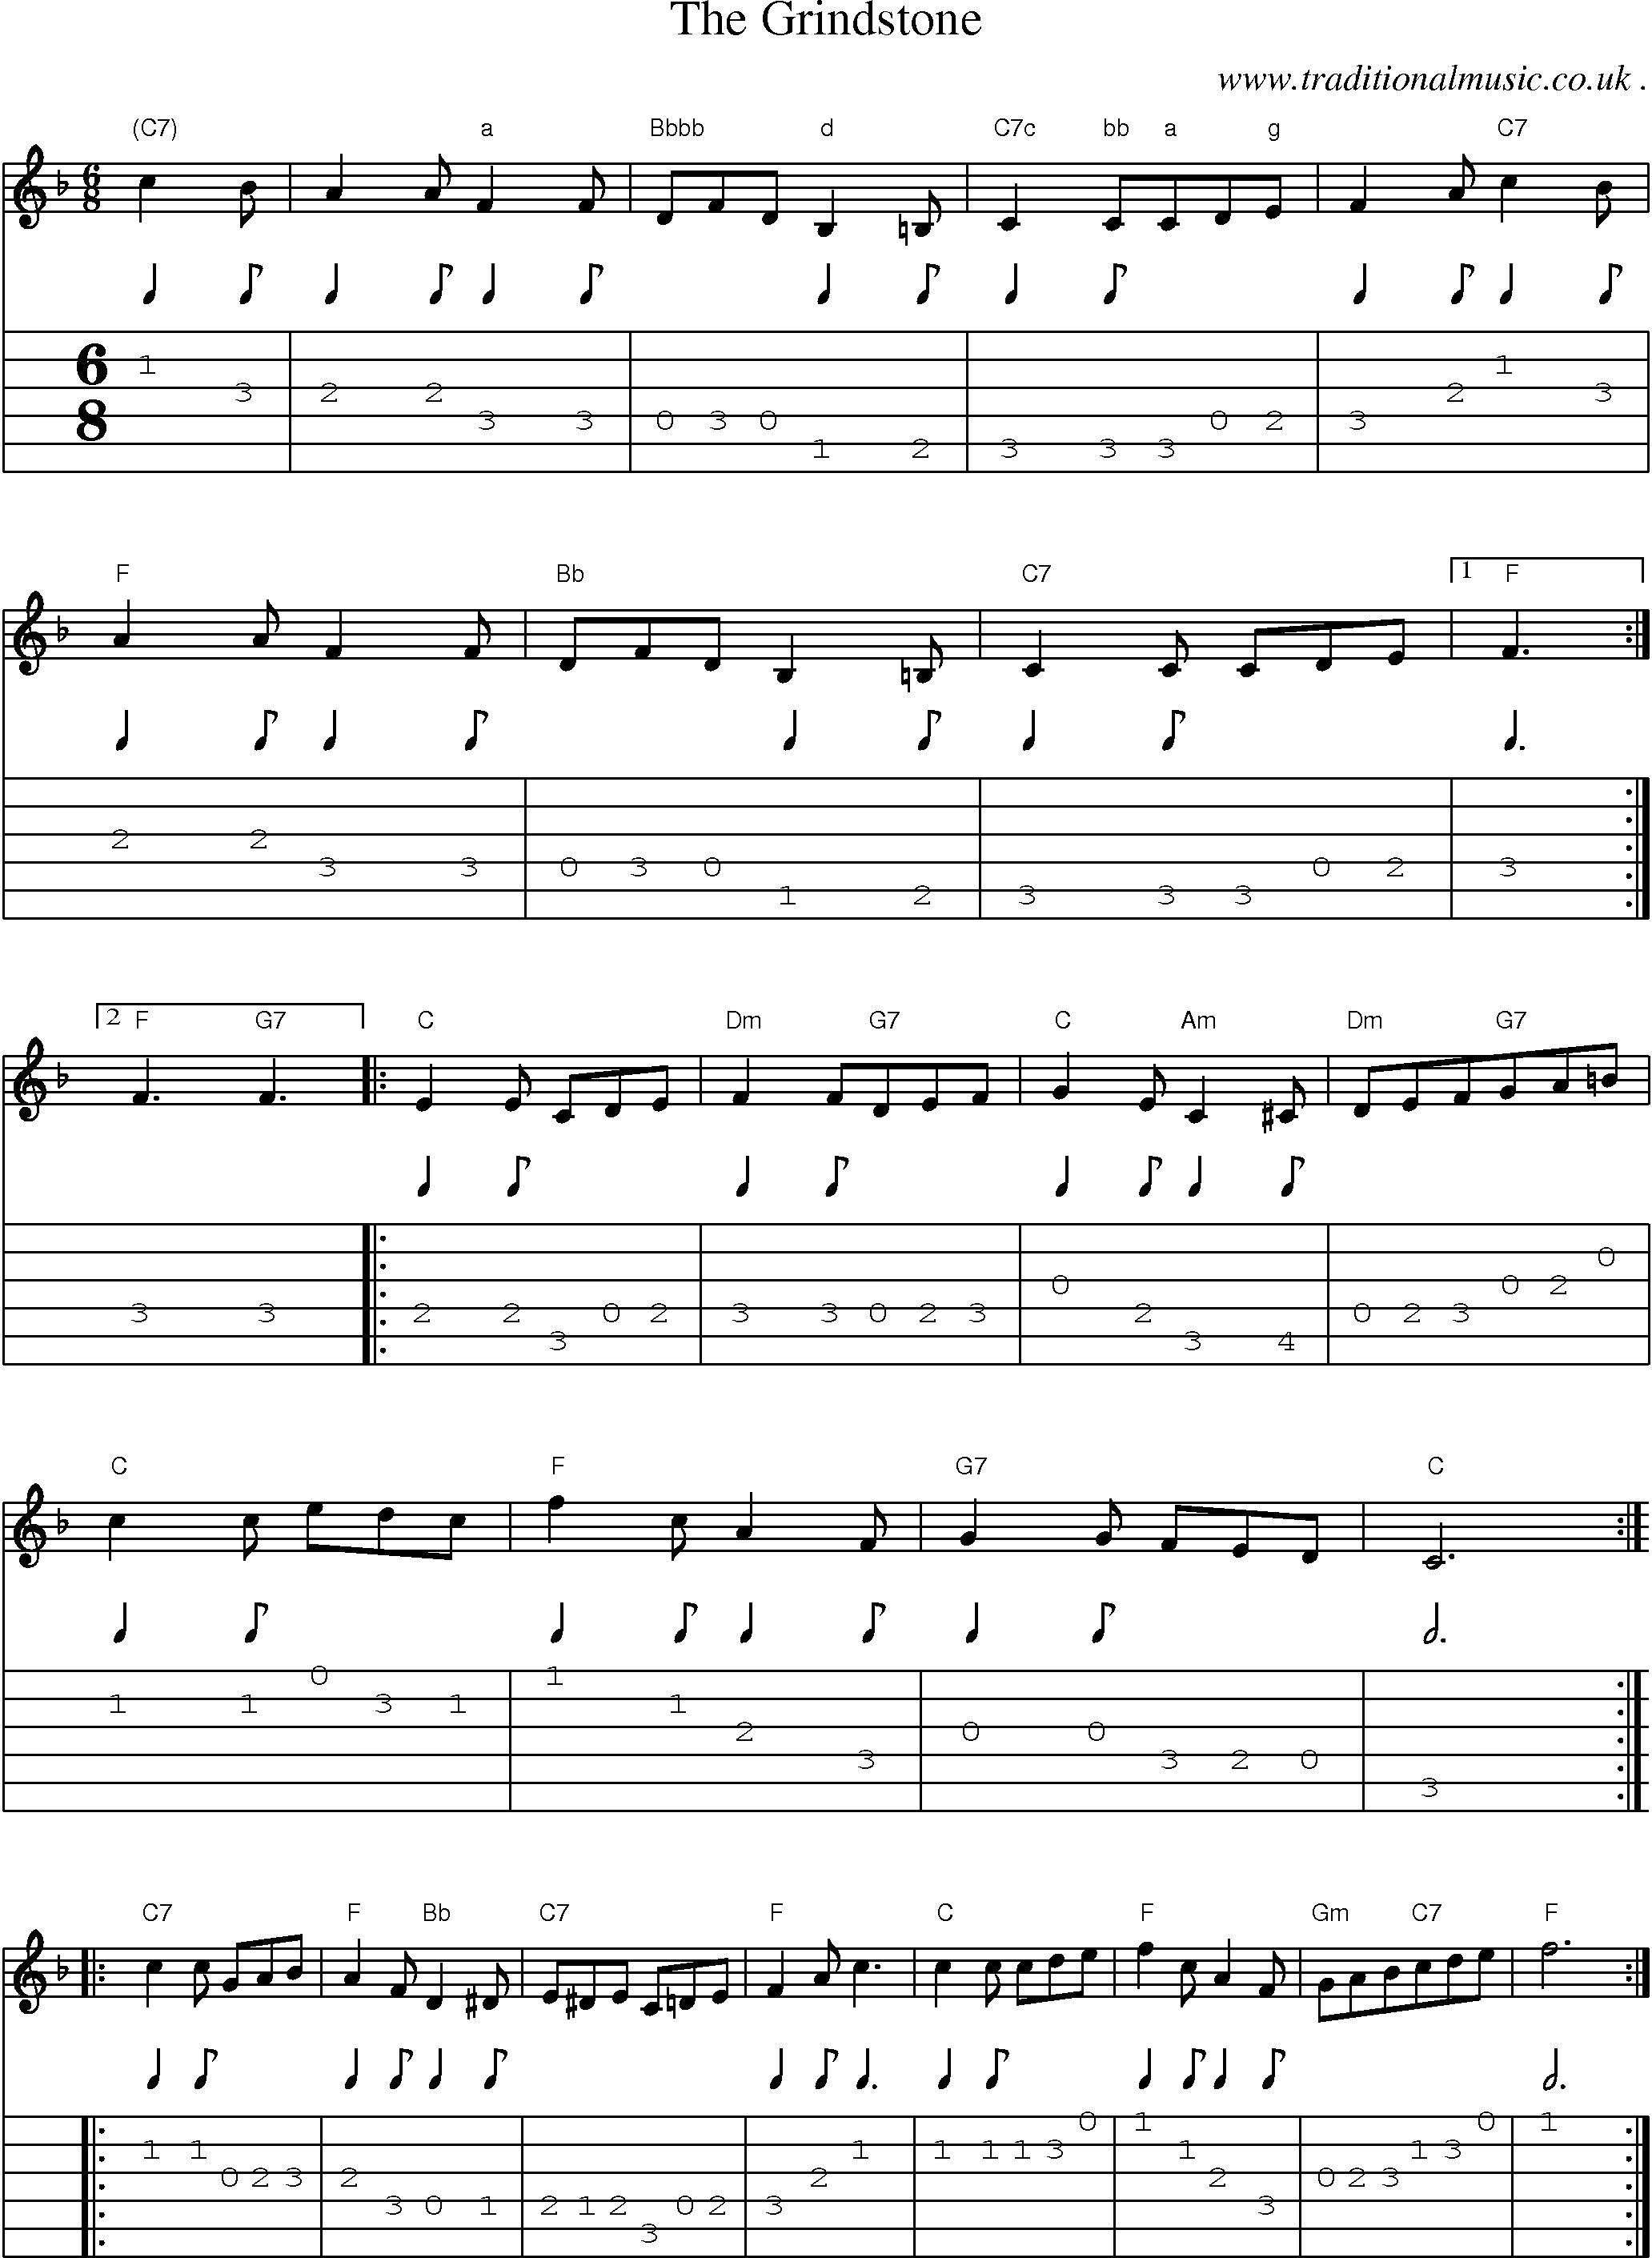 Sheet-Music and Guitar Tabs for The Grindstone